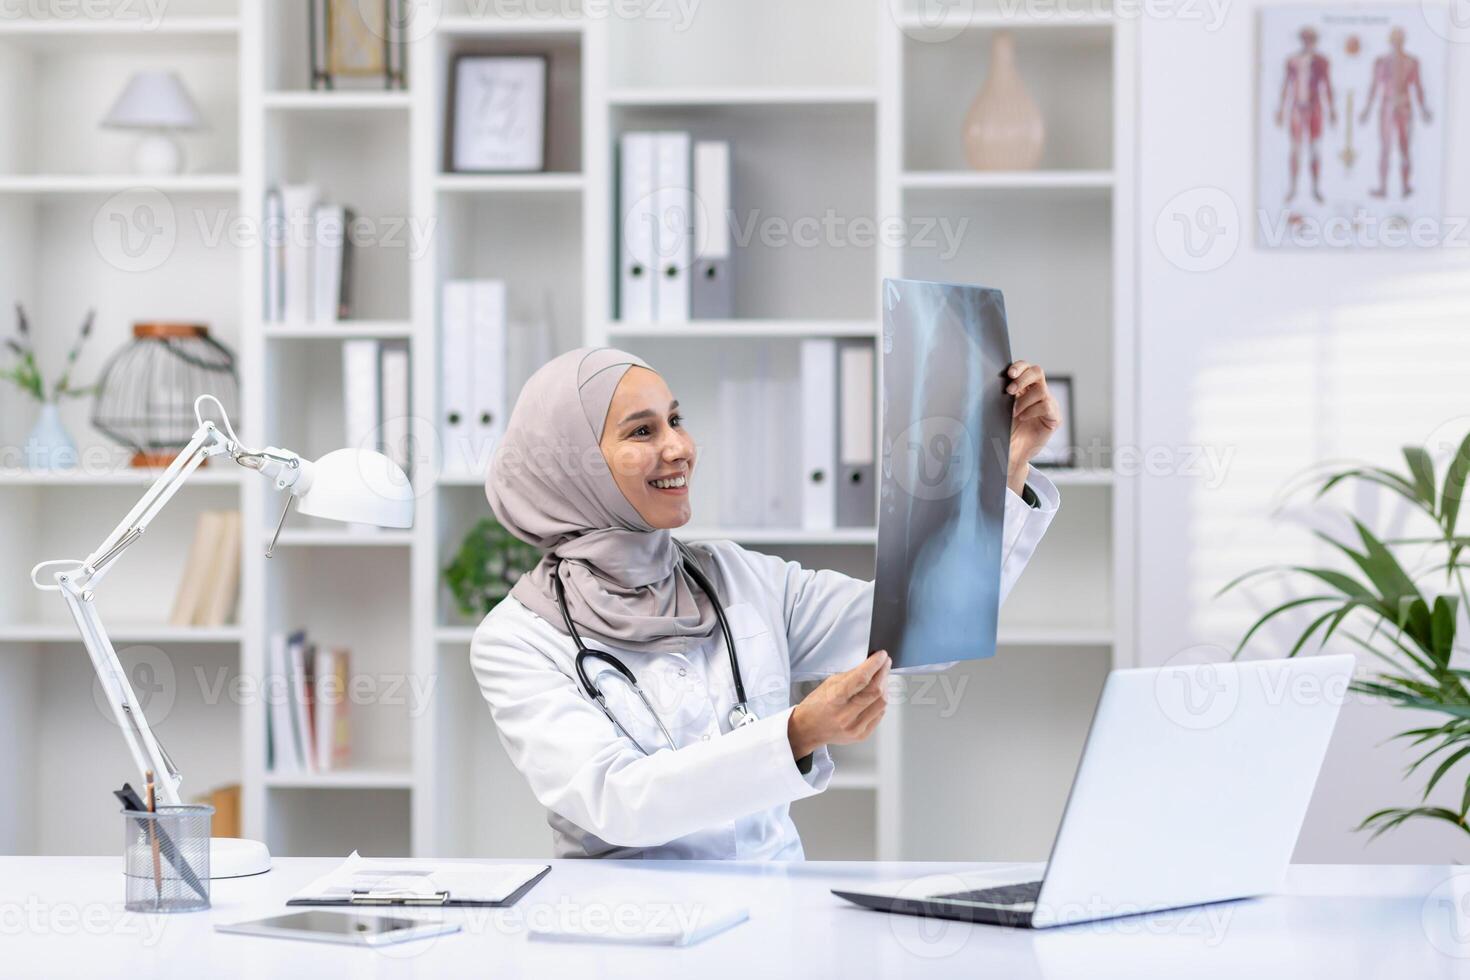 Smiling Muslim female doctor in hijab reviewing an X-ray in a well-lit medical office, reflecting healthcare professionalism and diversity. photo